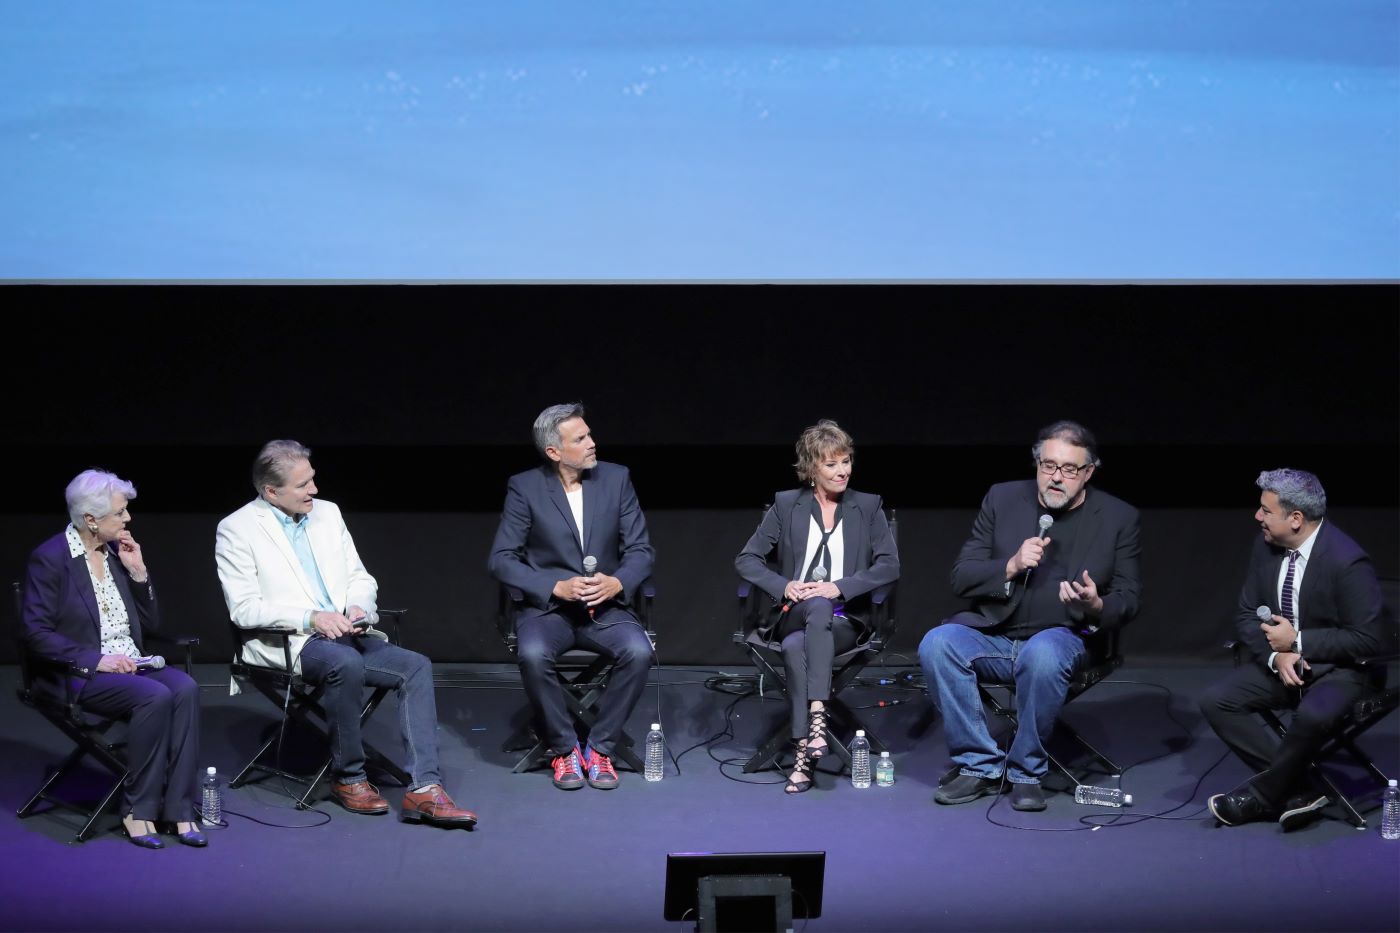 Six people that are from the cast of Disney's 'Beauty and the Beast' sitting in front a black background dressed professionally.